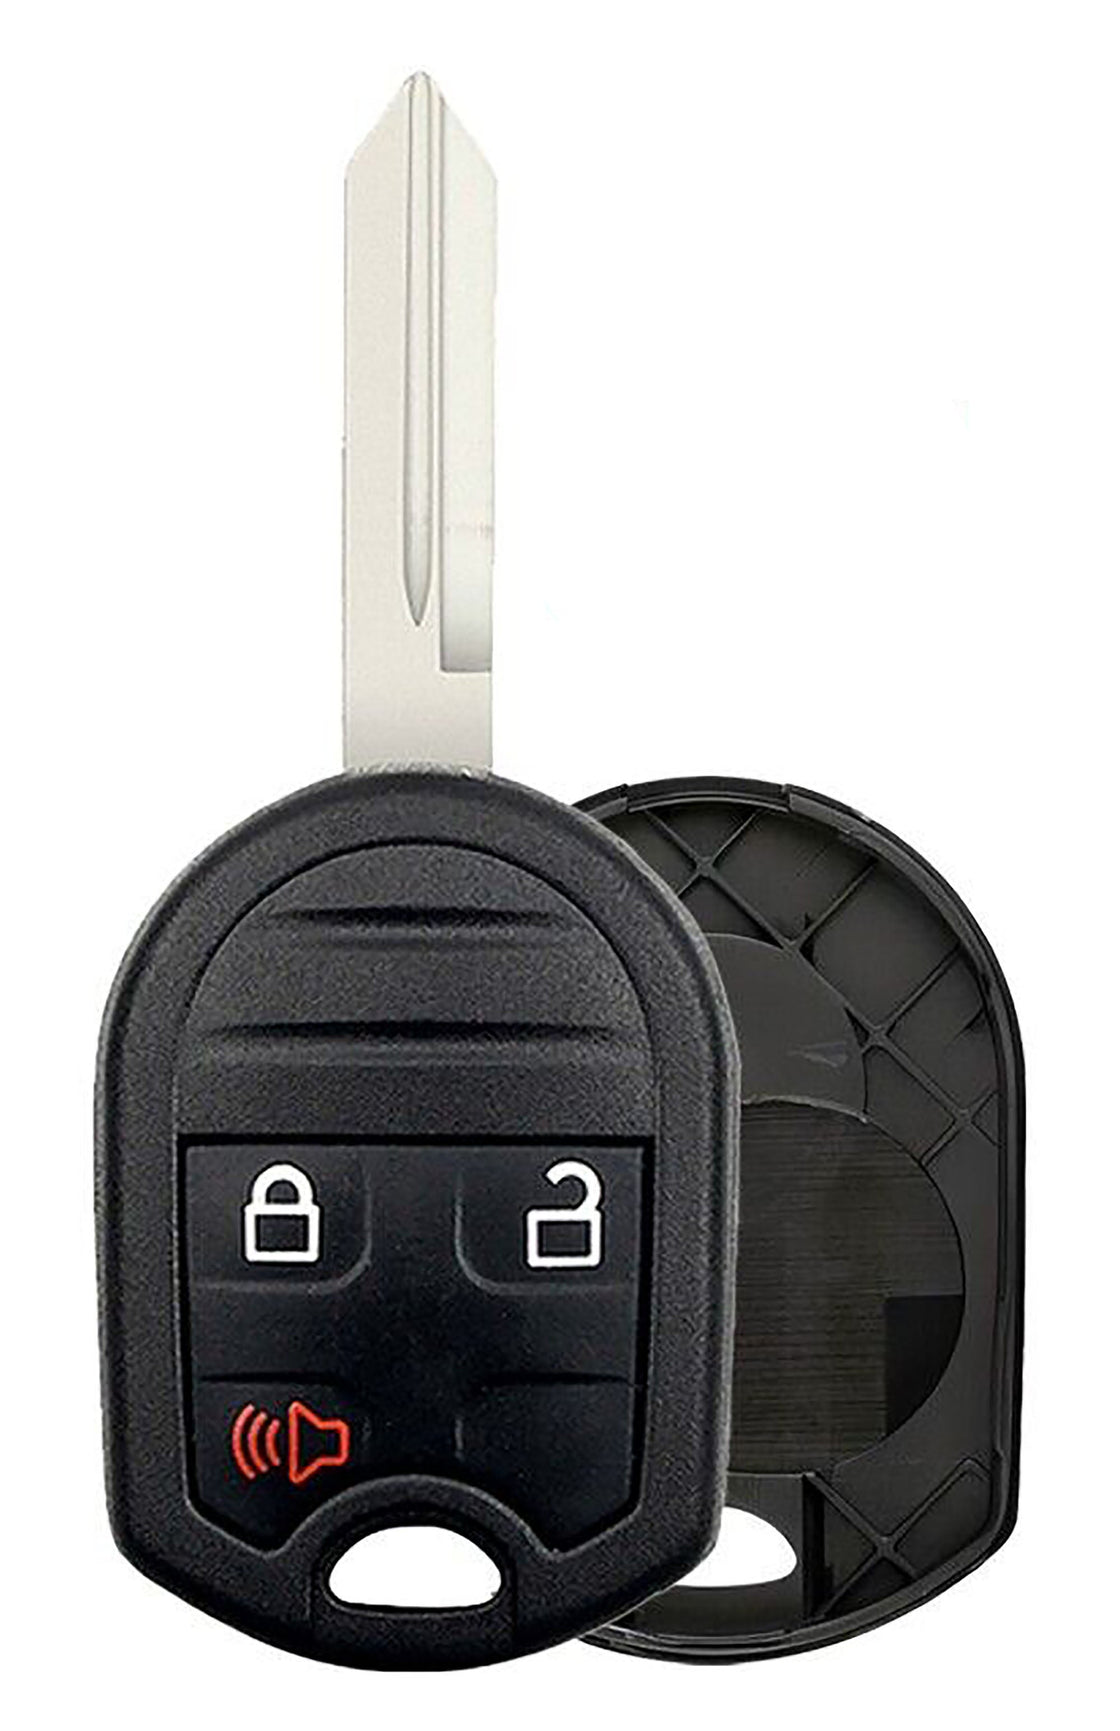 2014 Ford F-150 Key fob Remote SHELL / CASE - (No Electronics or Chip Inside)